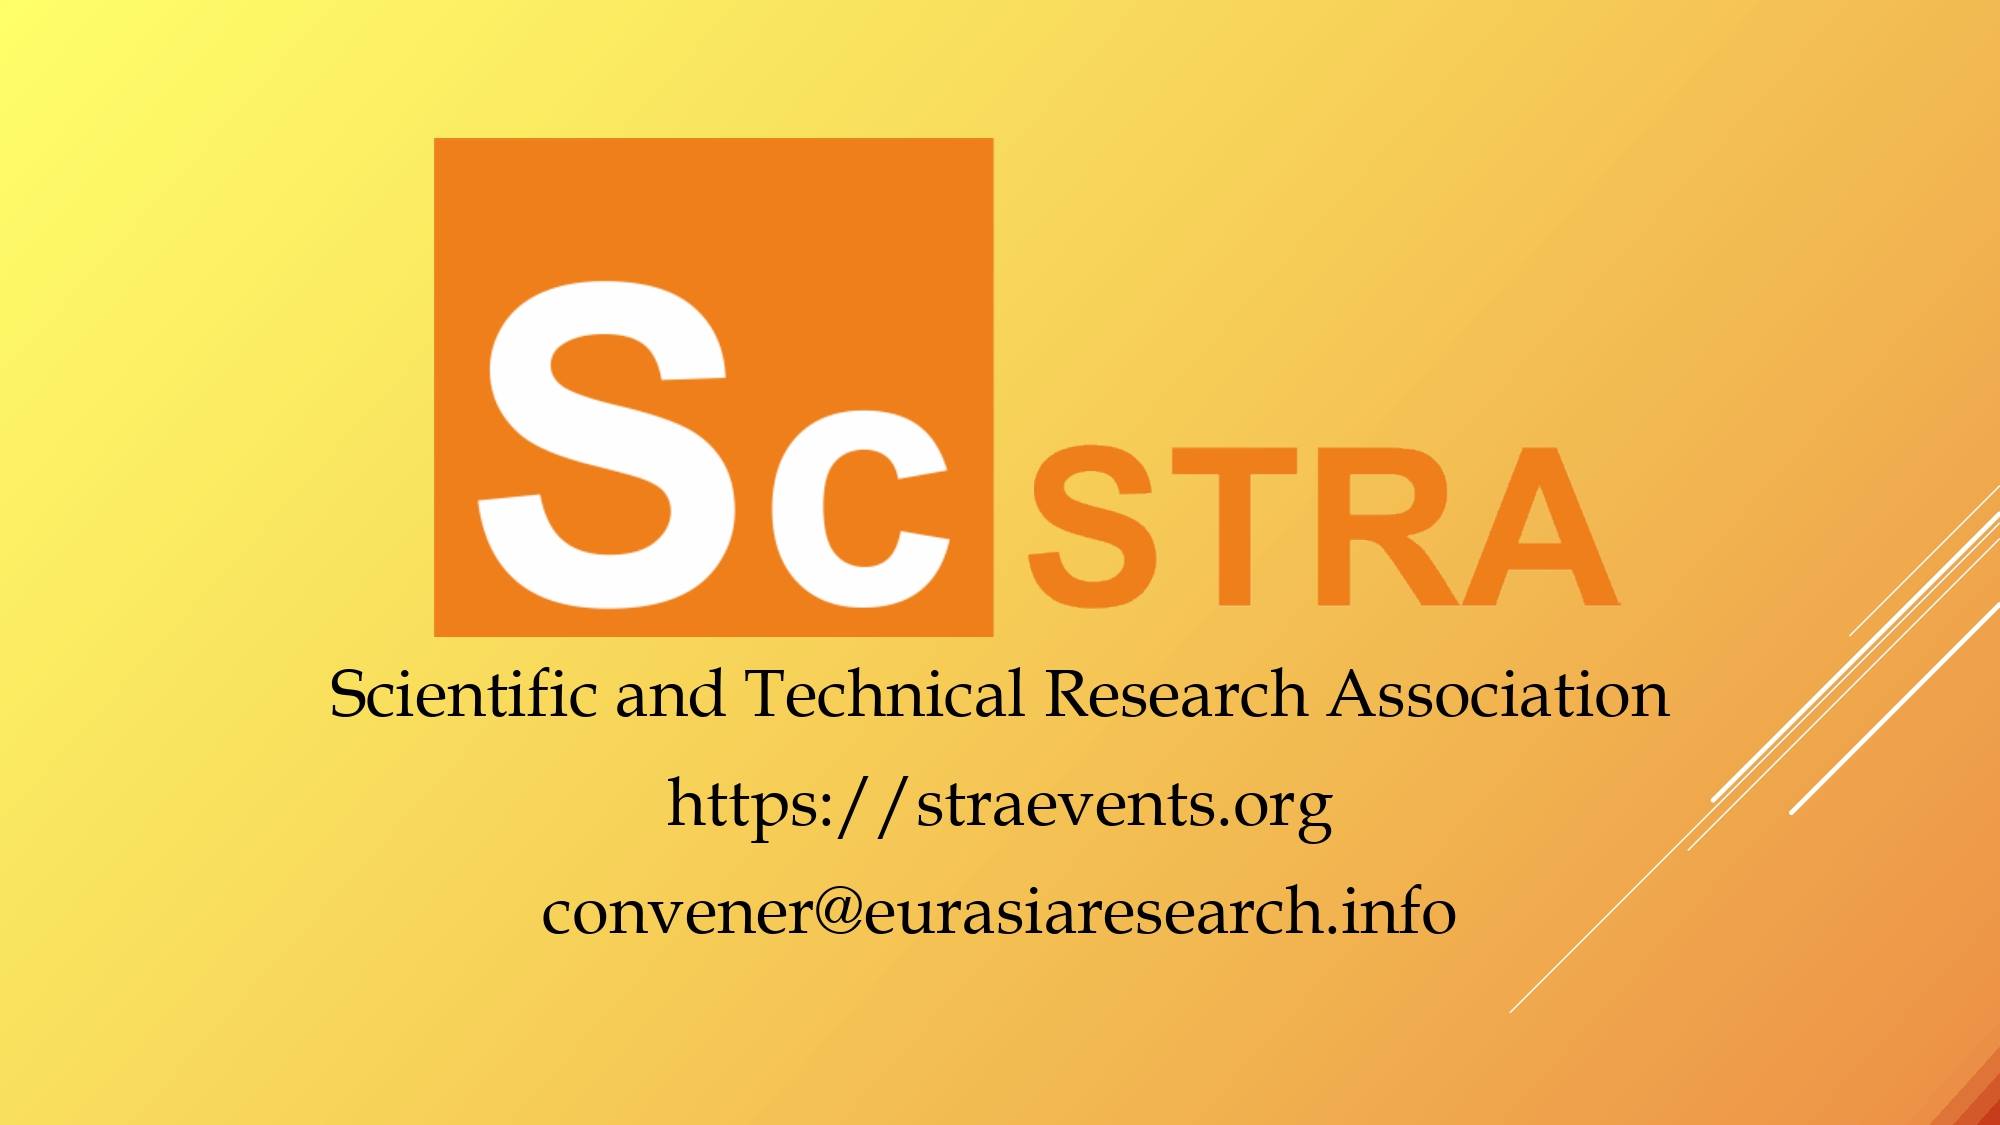 ICSTR Barcelona – International Conference on Science & Technology Research, 10-11 March 2022